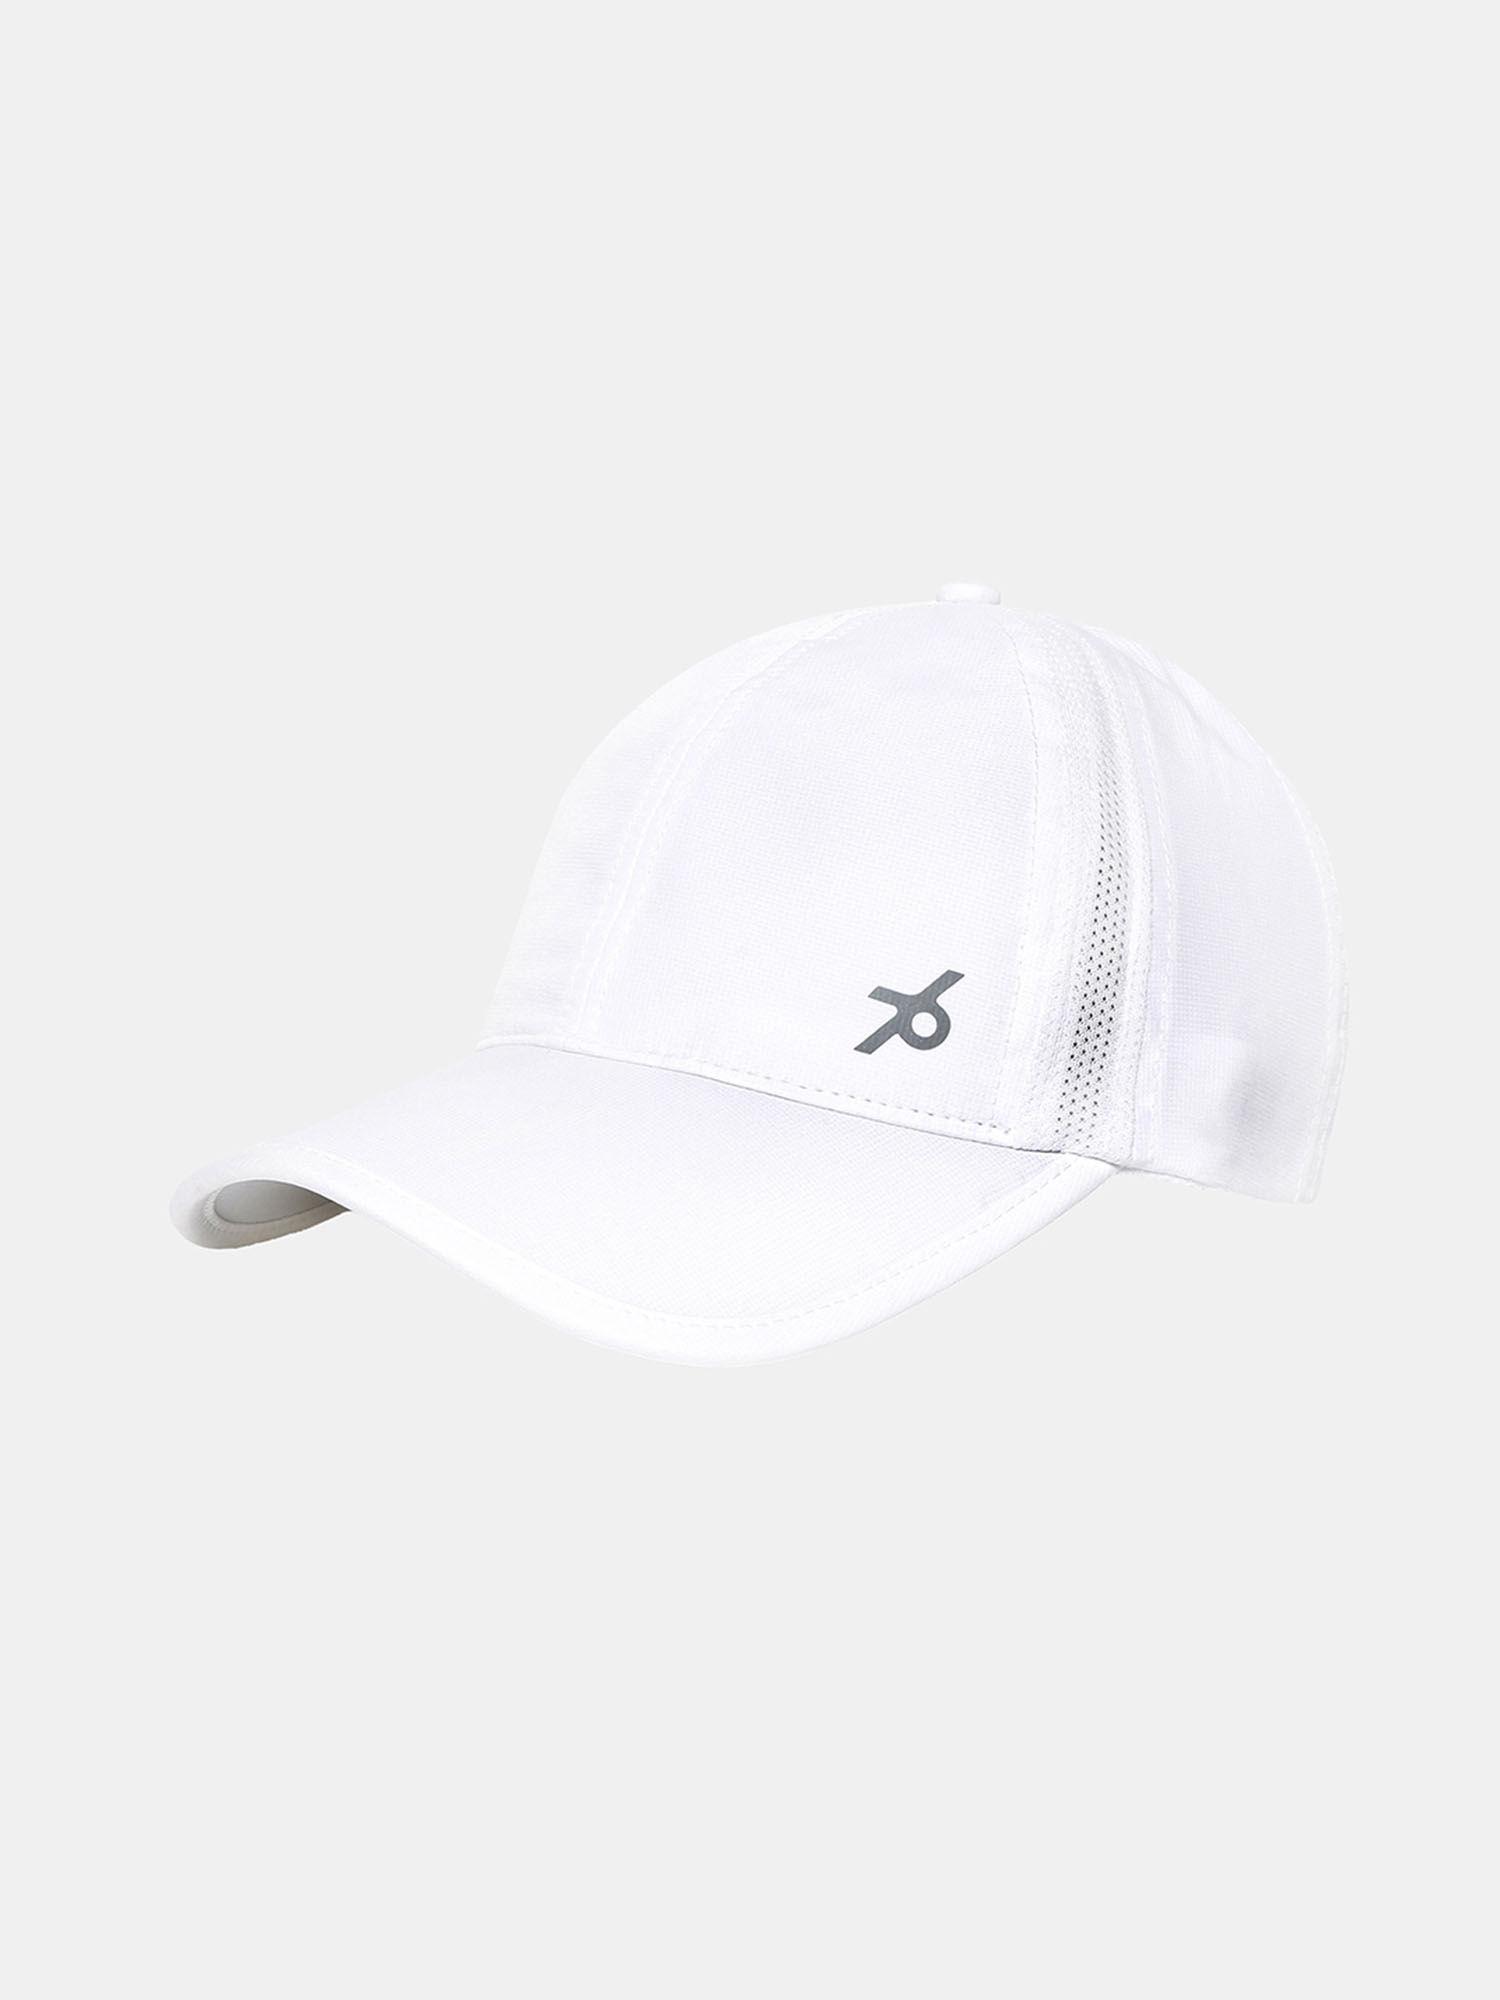 cp21-polyester-solid-cap-with-adjustable-back-closure-and-stay-dry-white